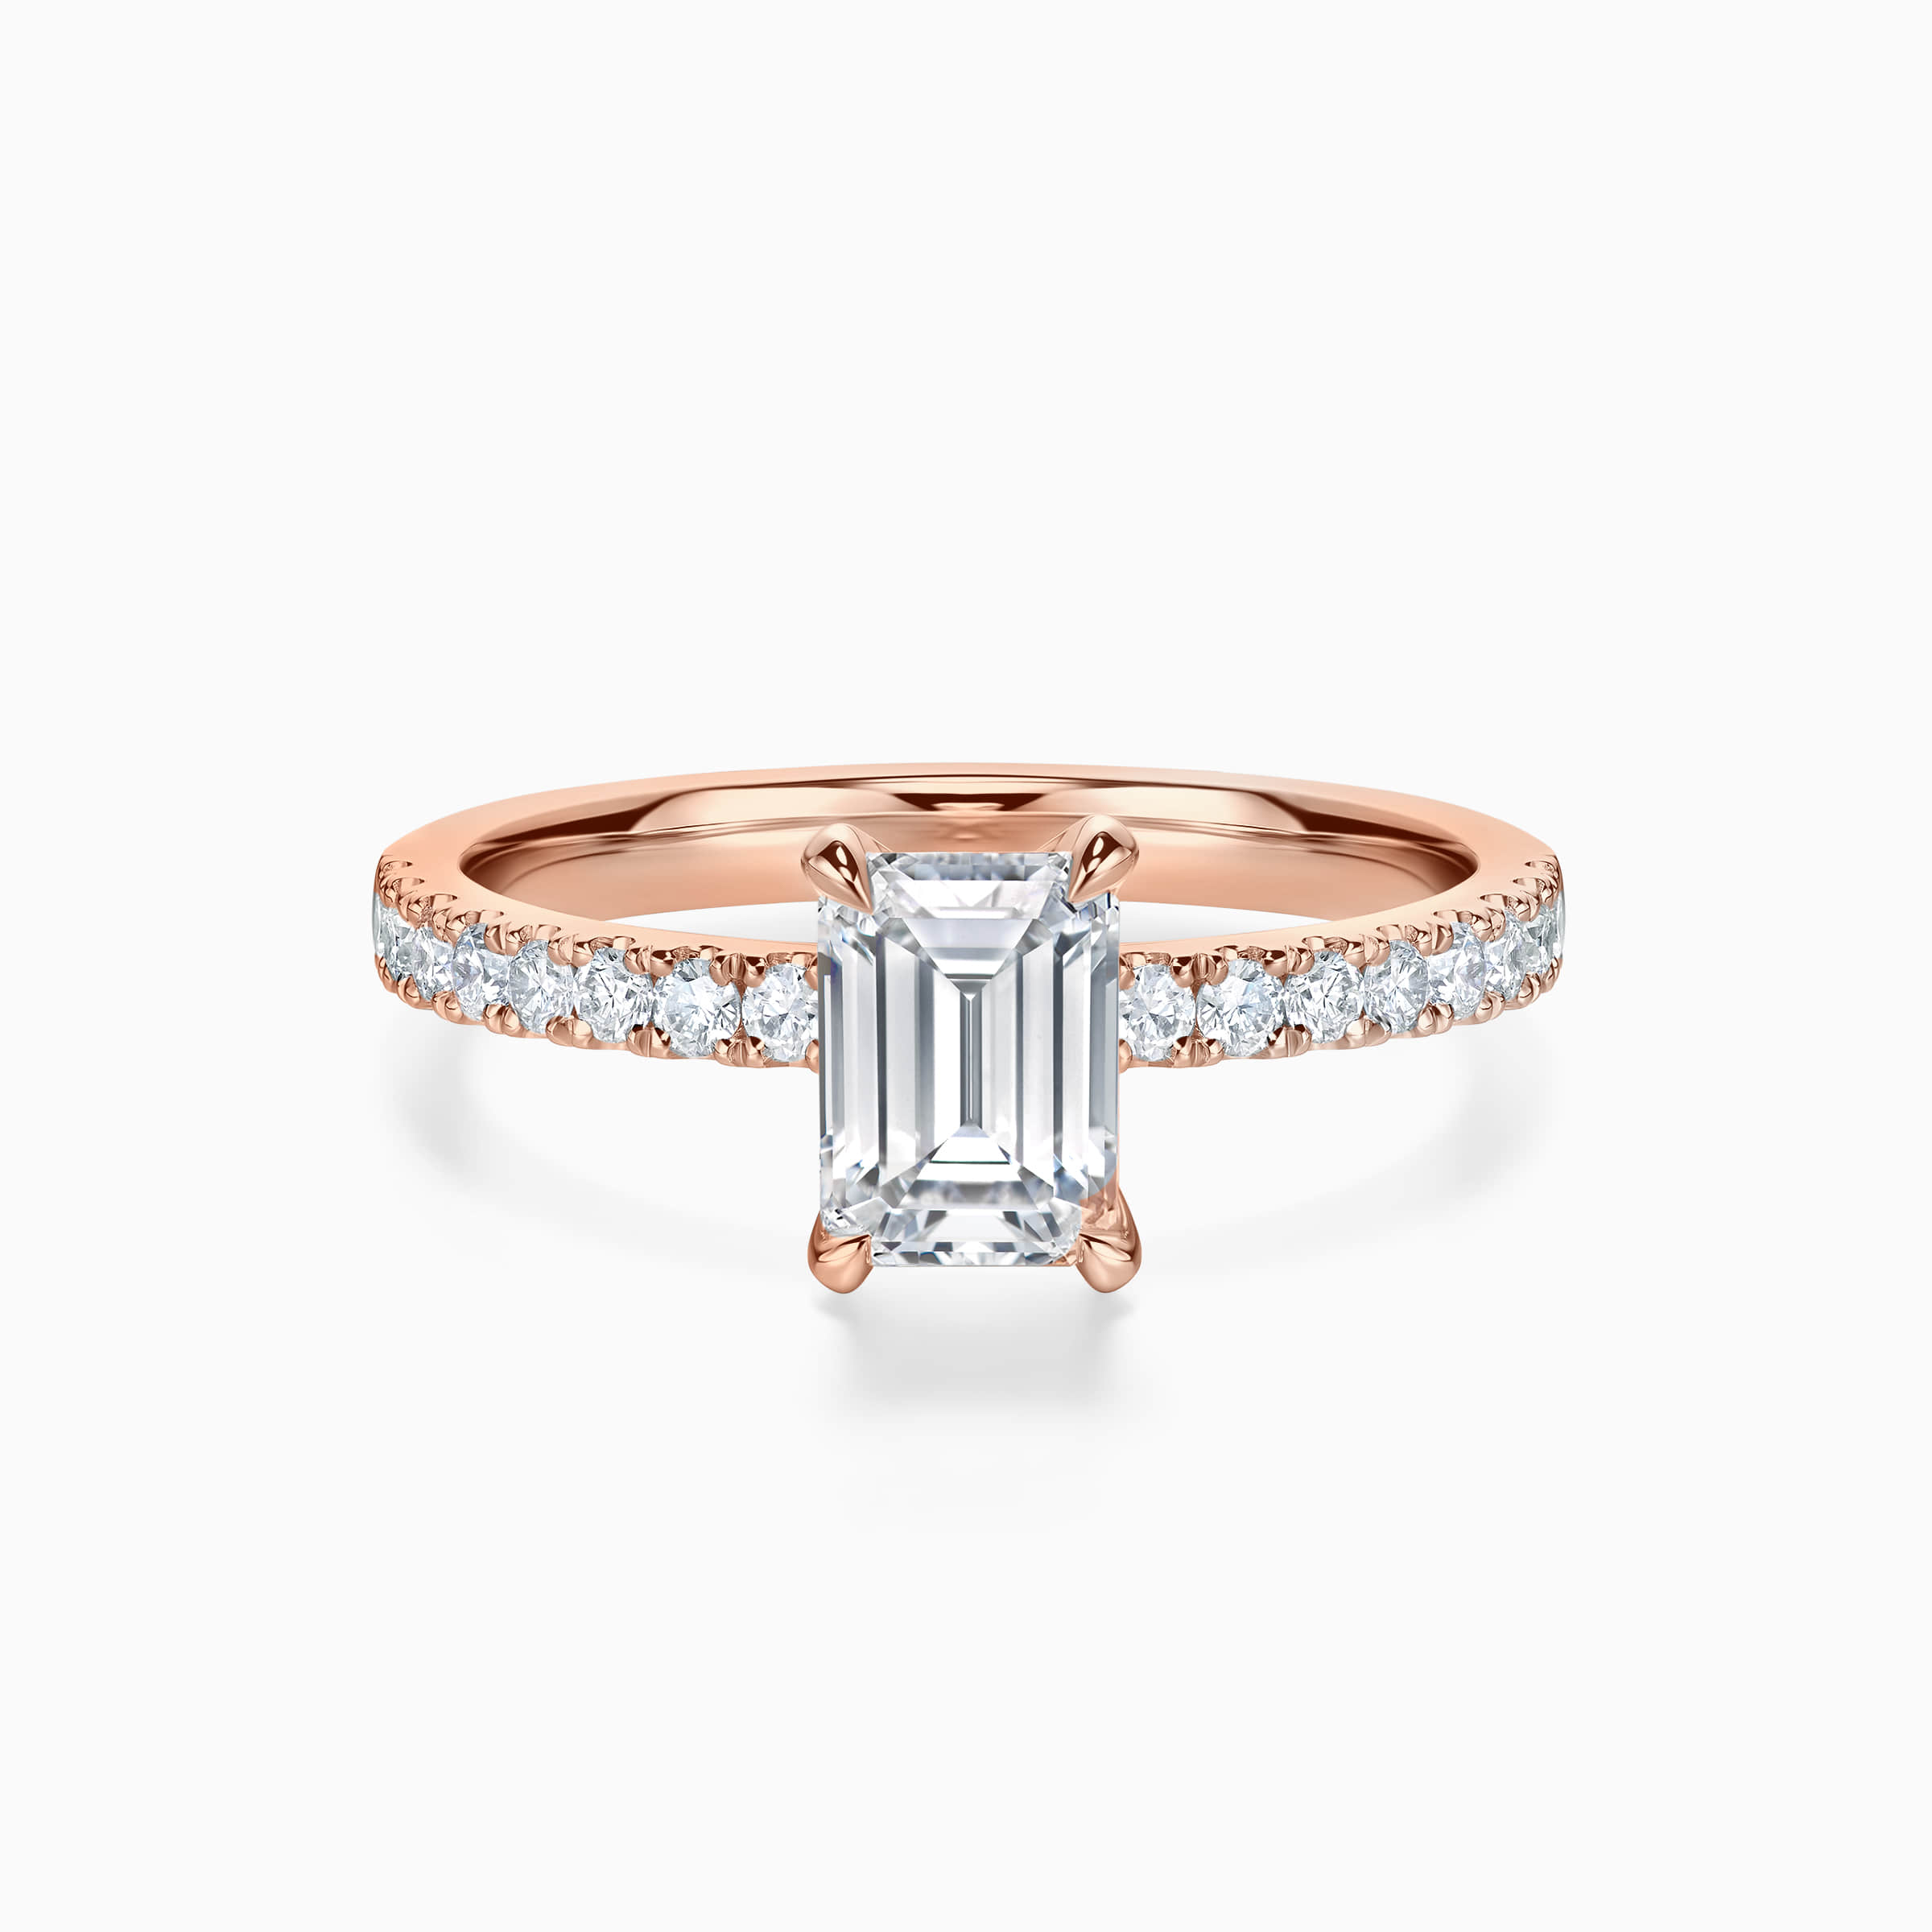 Darry Ring emerald cut promise ring in rose gold